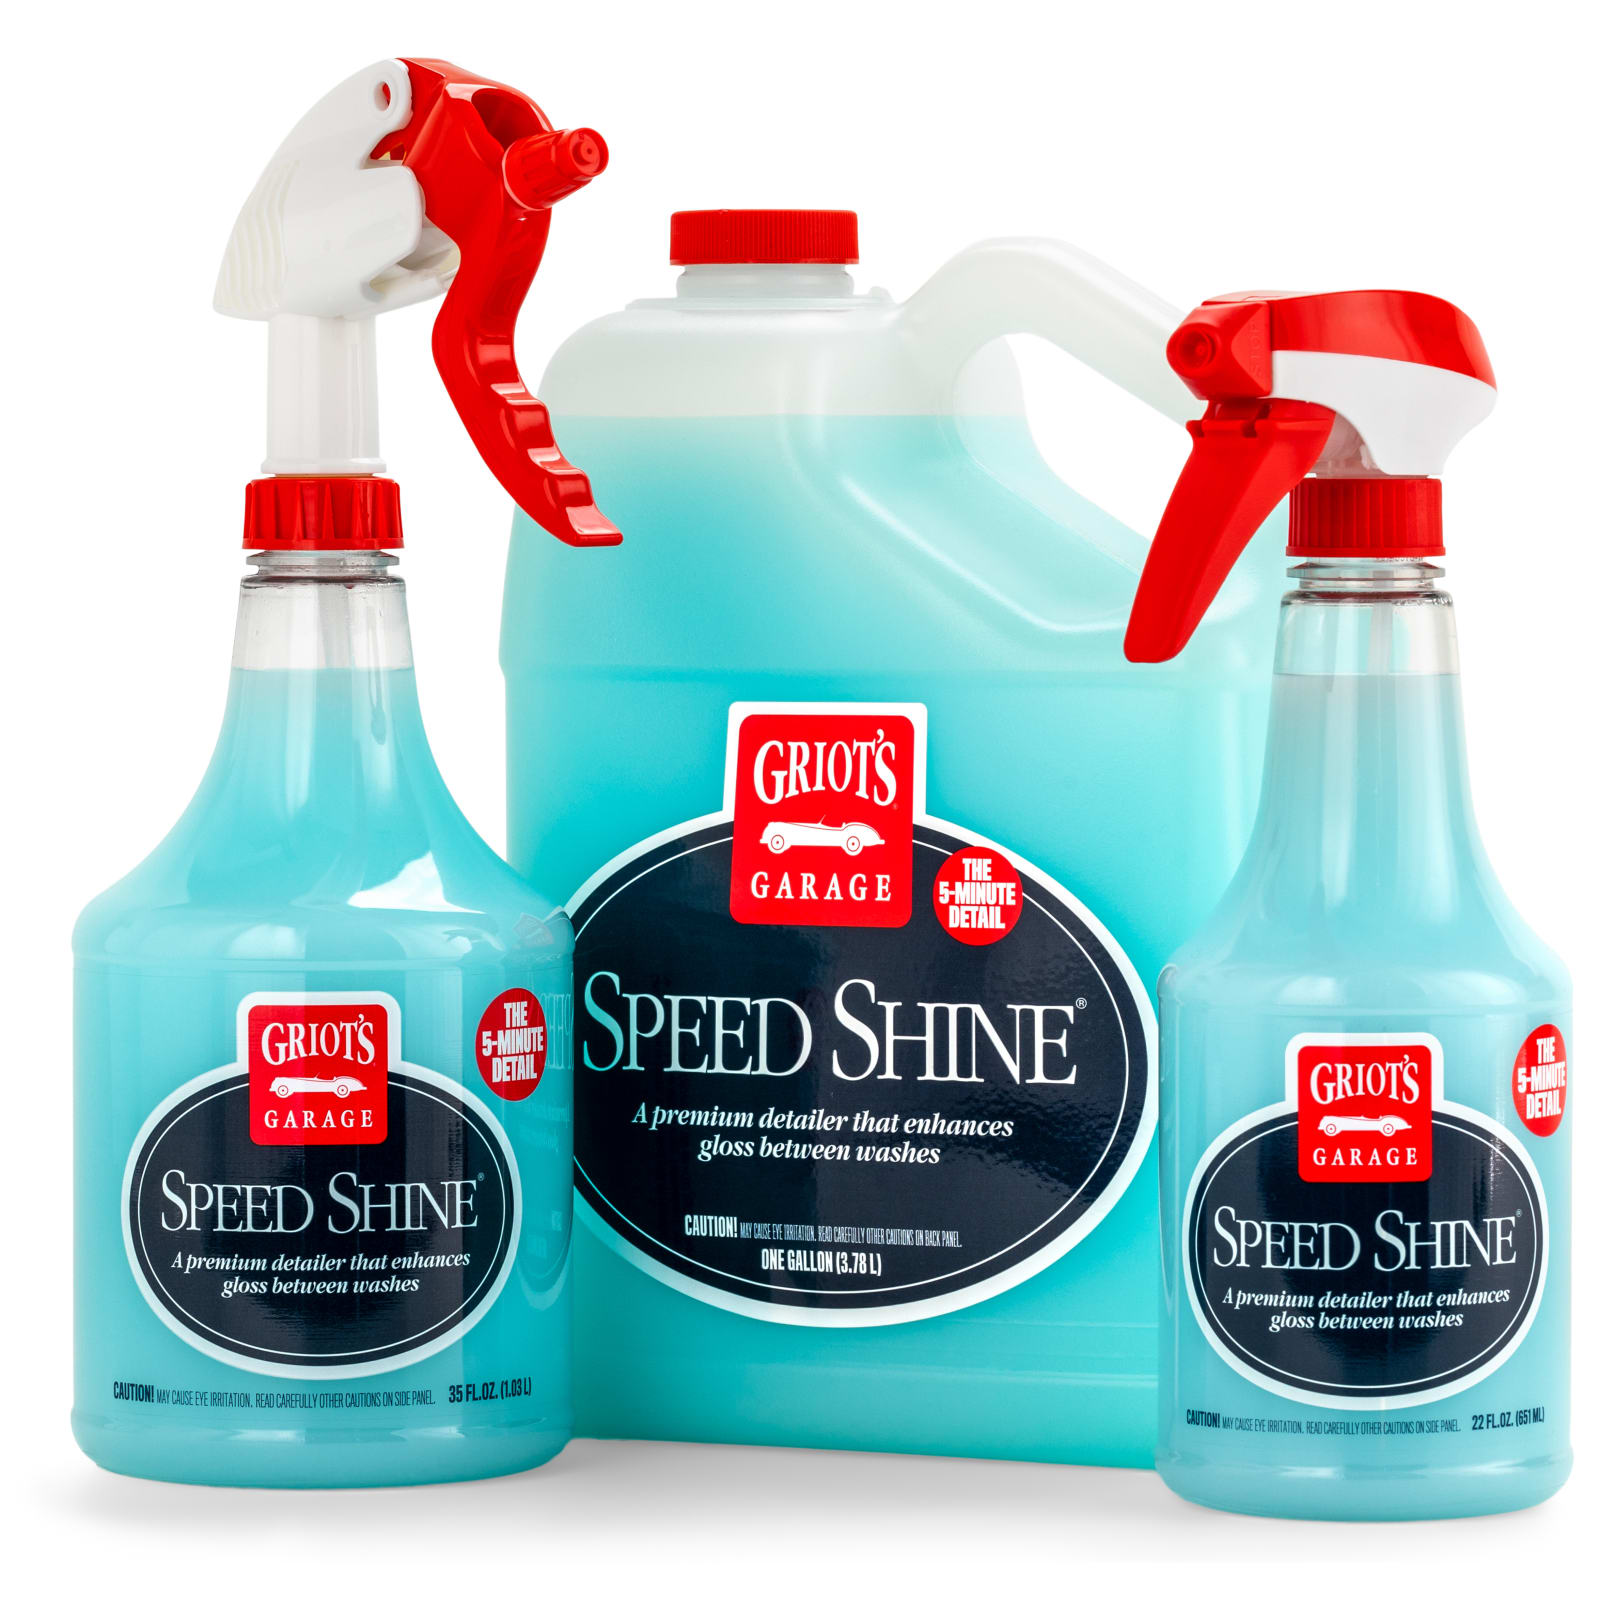 Sustainable Auto Detailing Supplies: What You Need to Know?